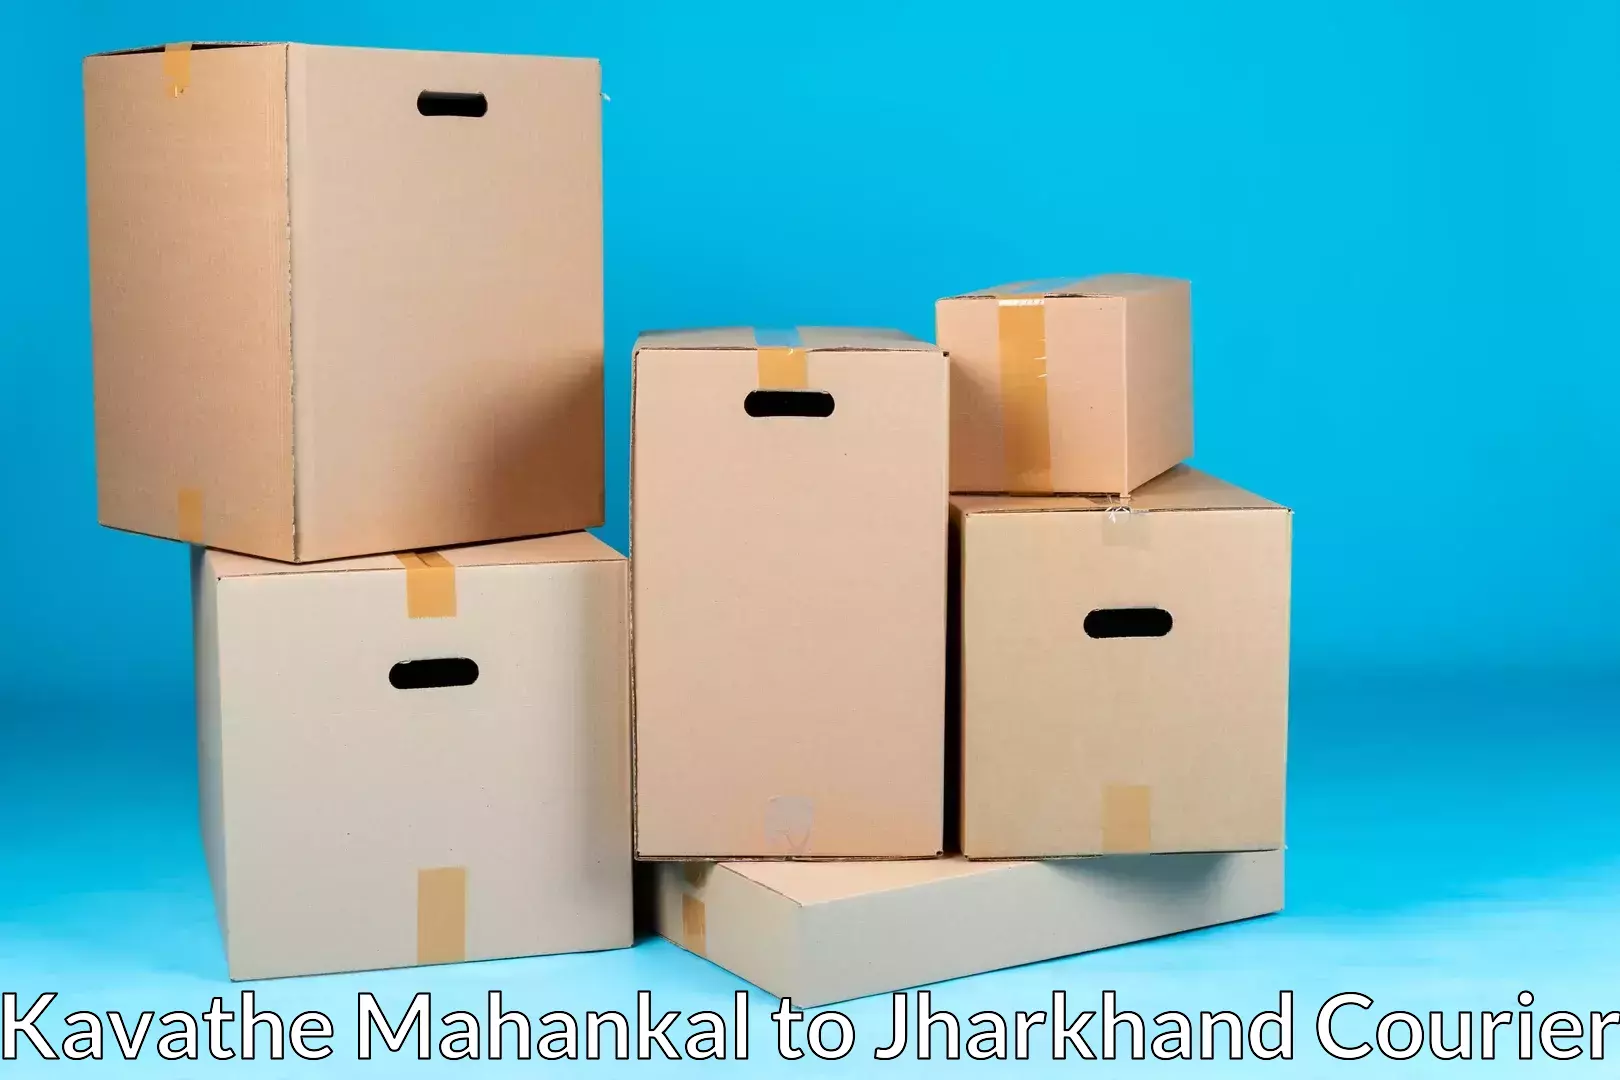 Moving and storage services in Kavathe Mahankal to Rajmahal